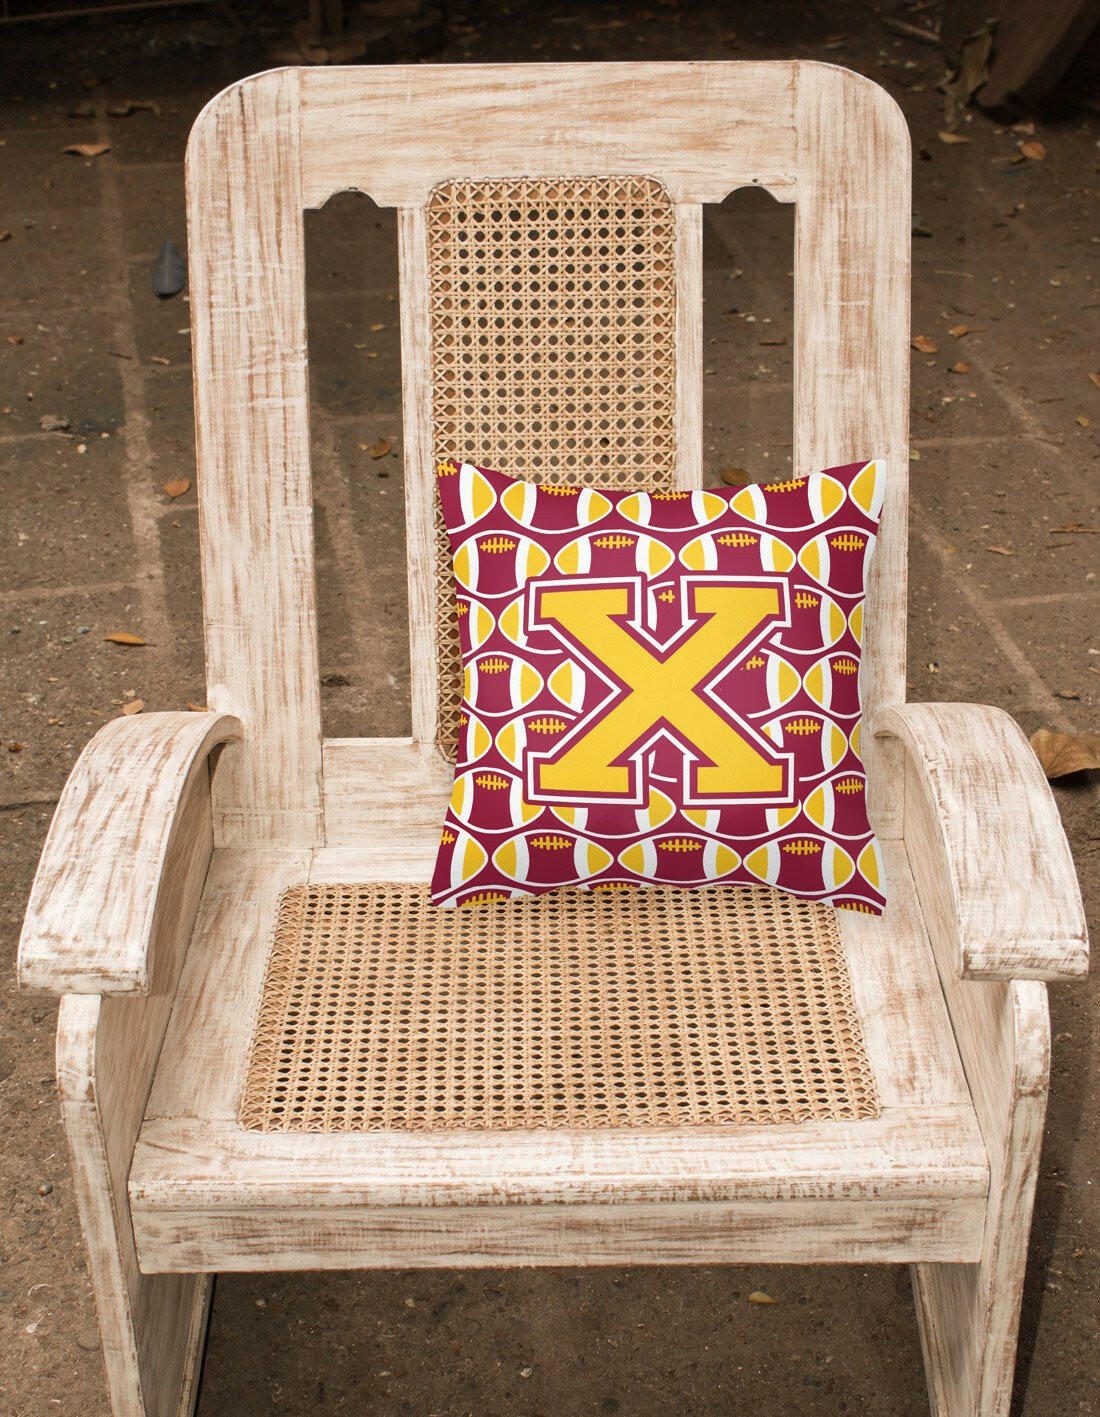 Letter X Football Maroon and Gold Fabric Decorative Pillow CJ1081-XPW1414 by Caroline's Treasures